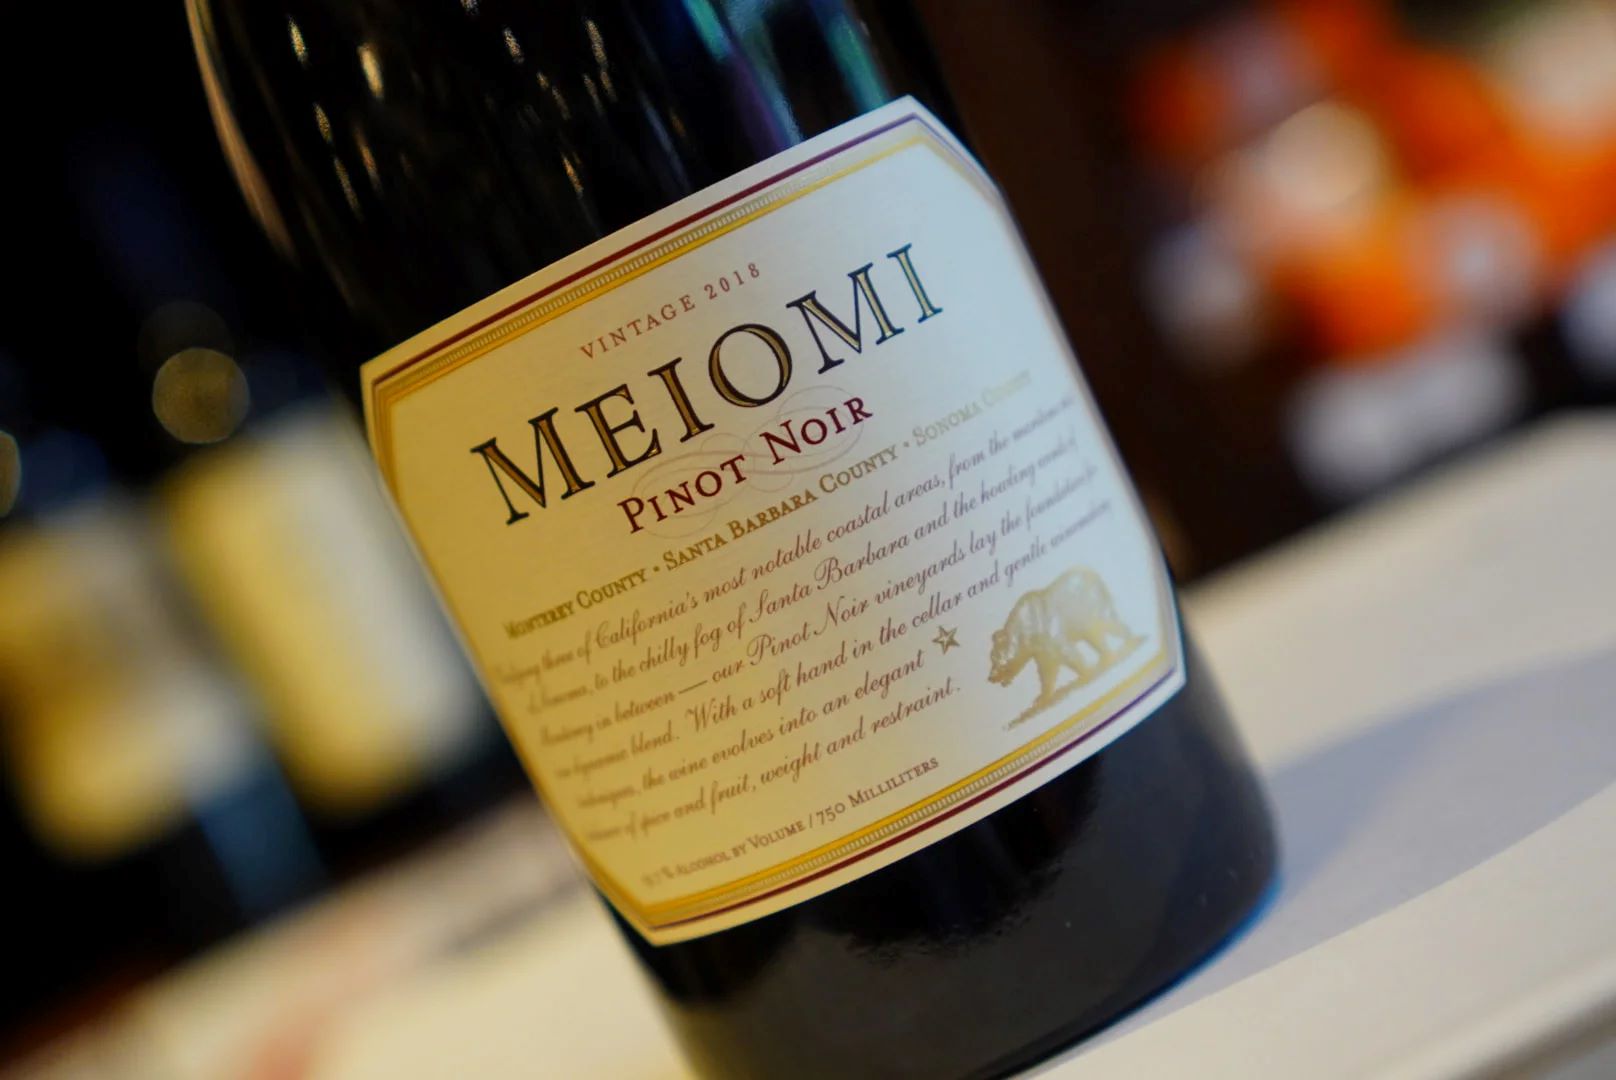 18-astonishing-facts-about-meiomi-wine